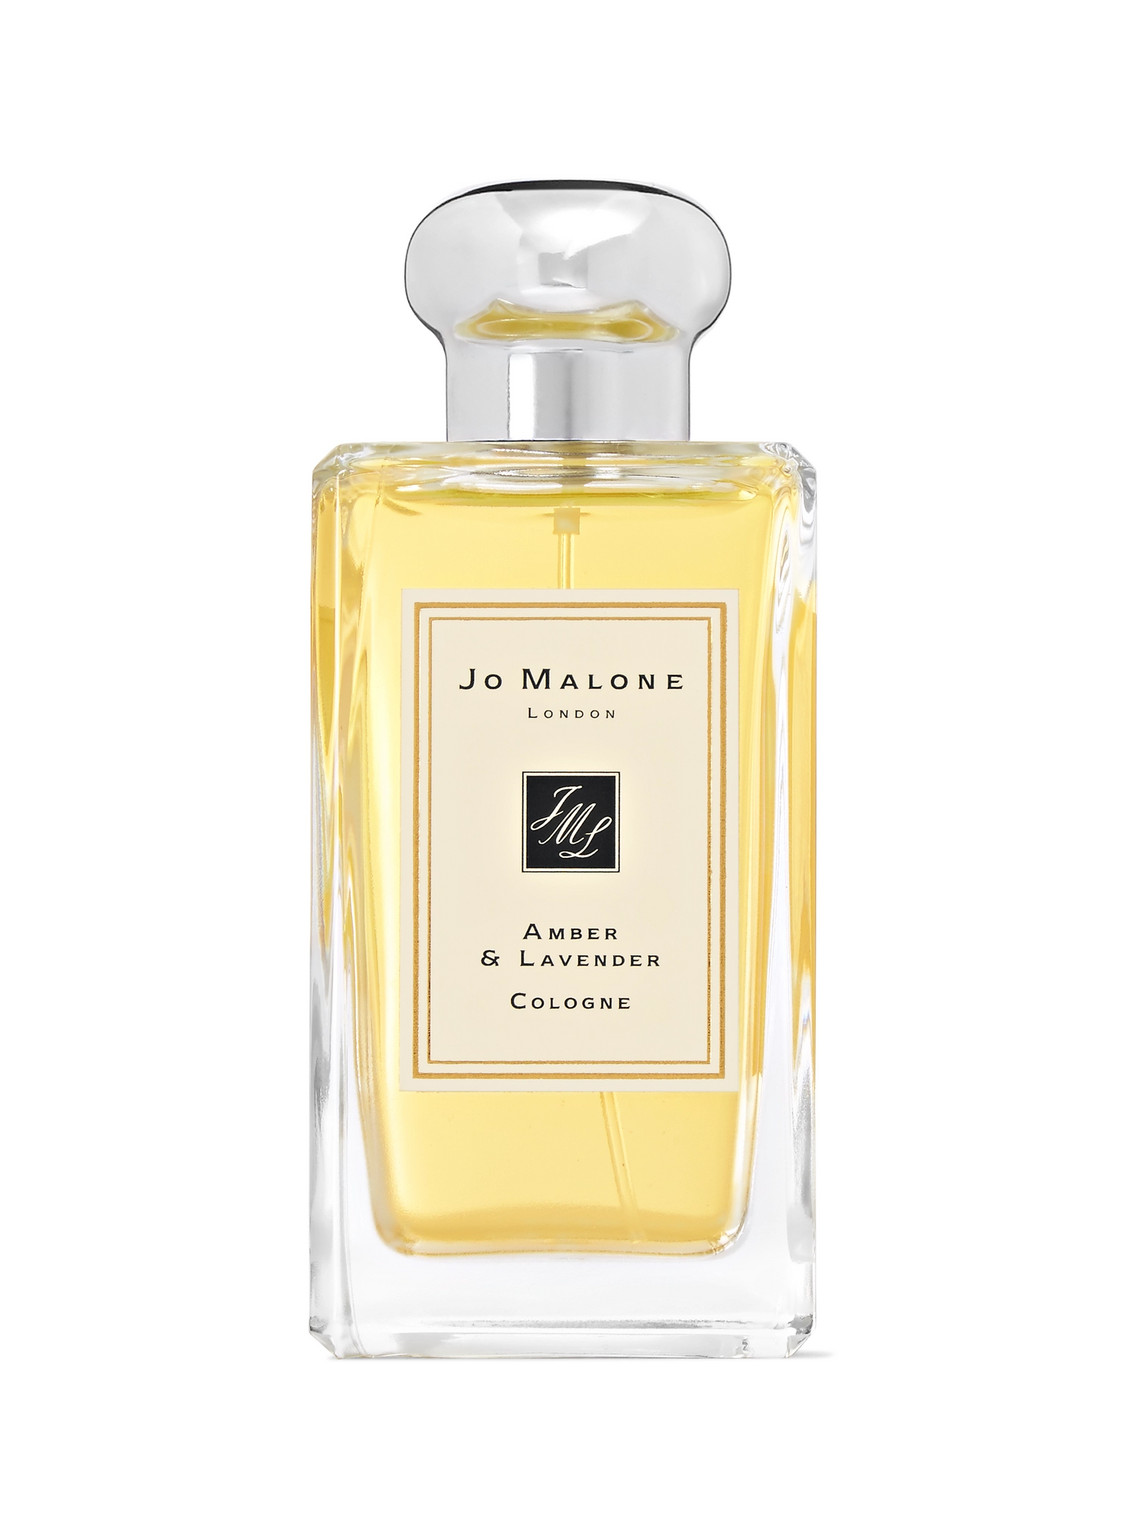 Jo Malone London Amber & Lavender Cologne, 100ml In Colorless